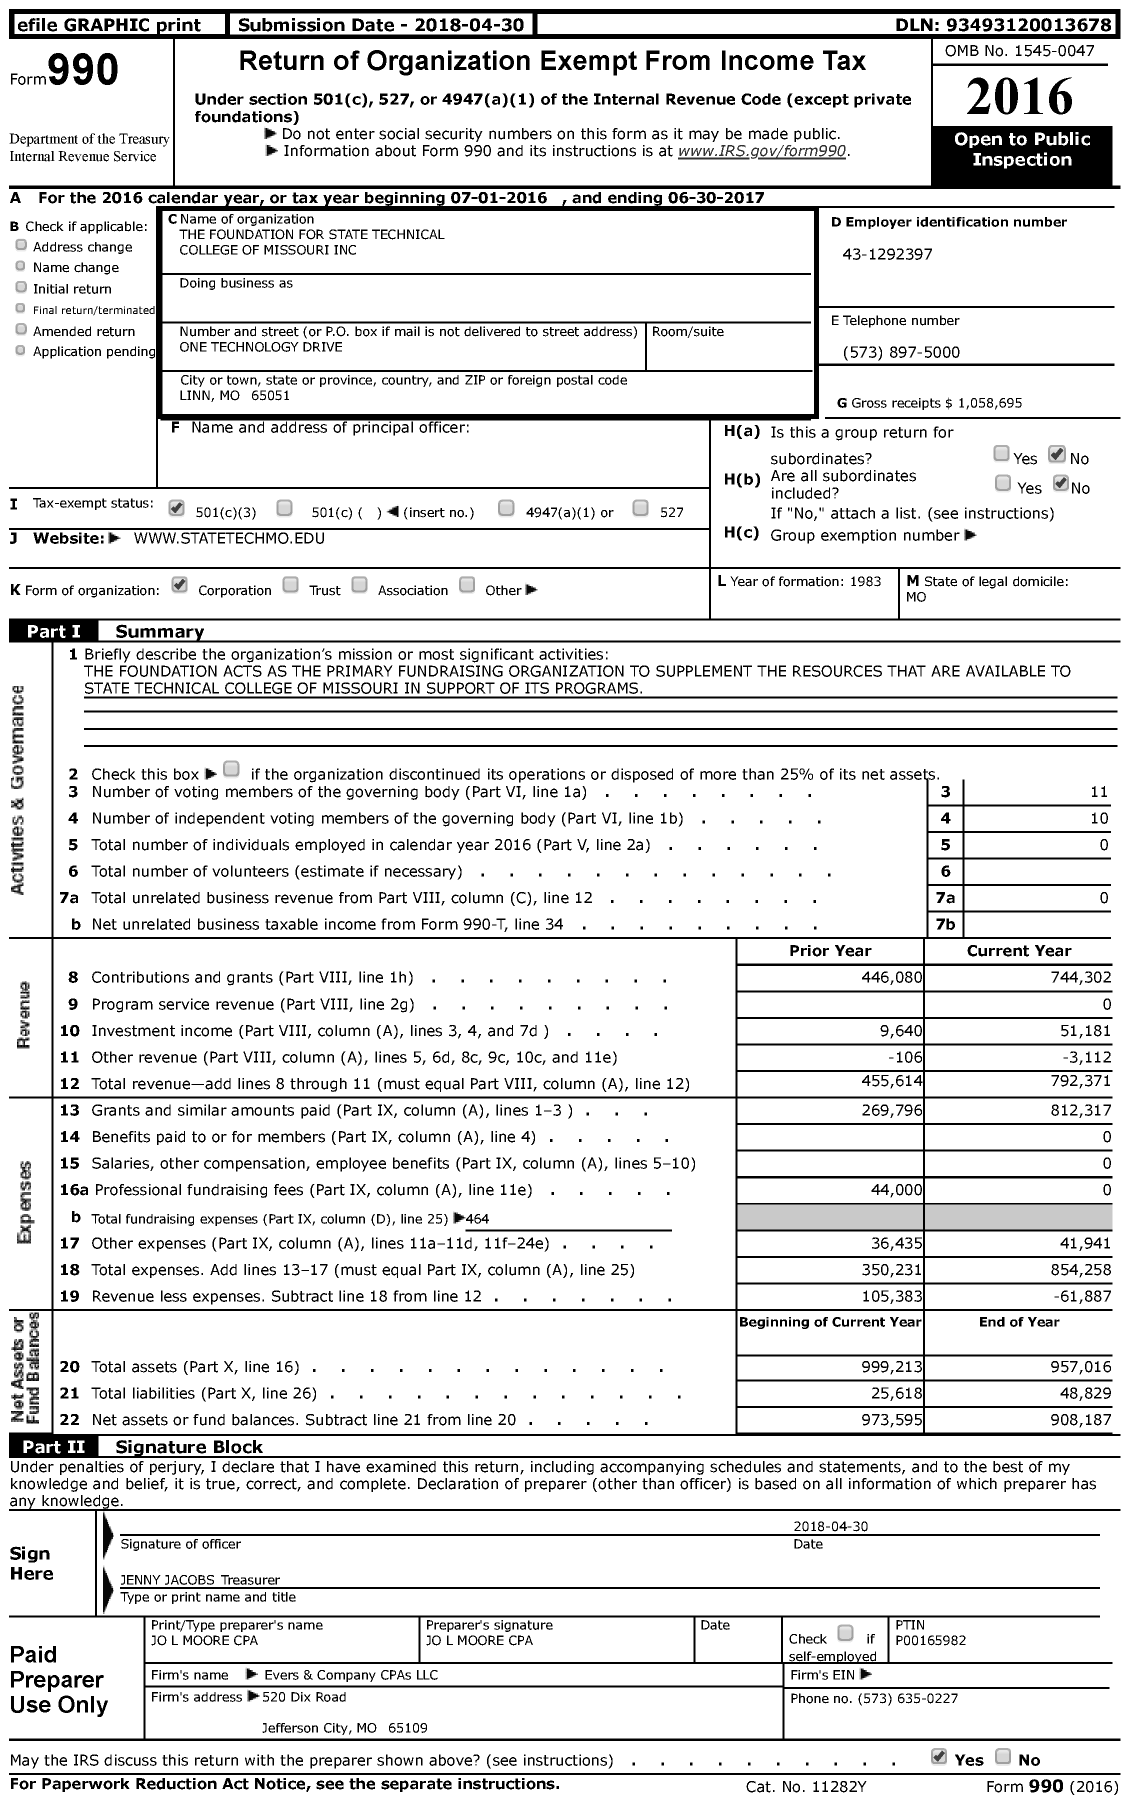 Image of first page of 2016 Form 990 for The Foundation for State Technical College of Missouri